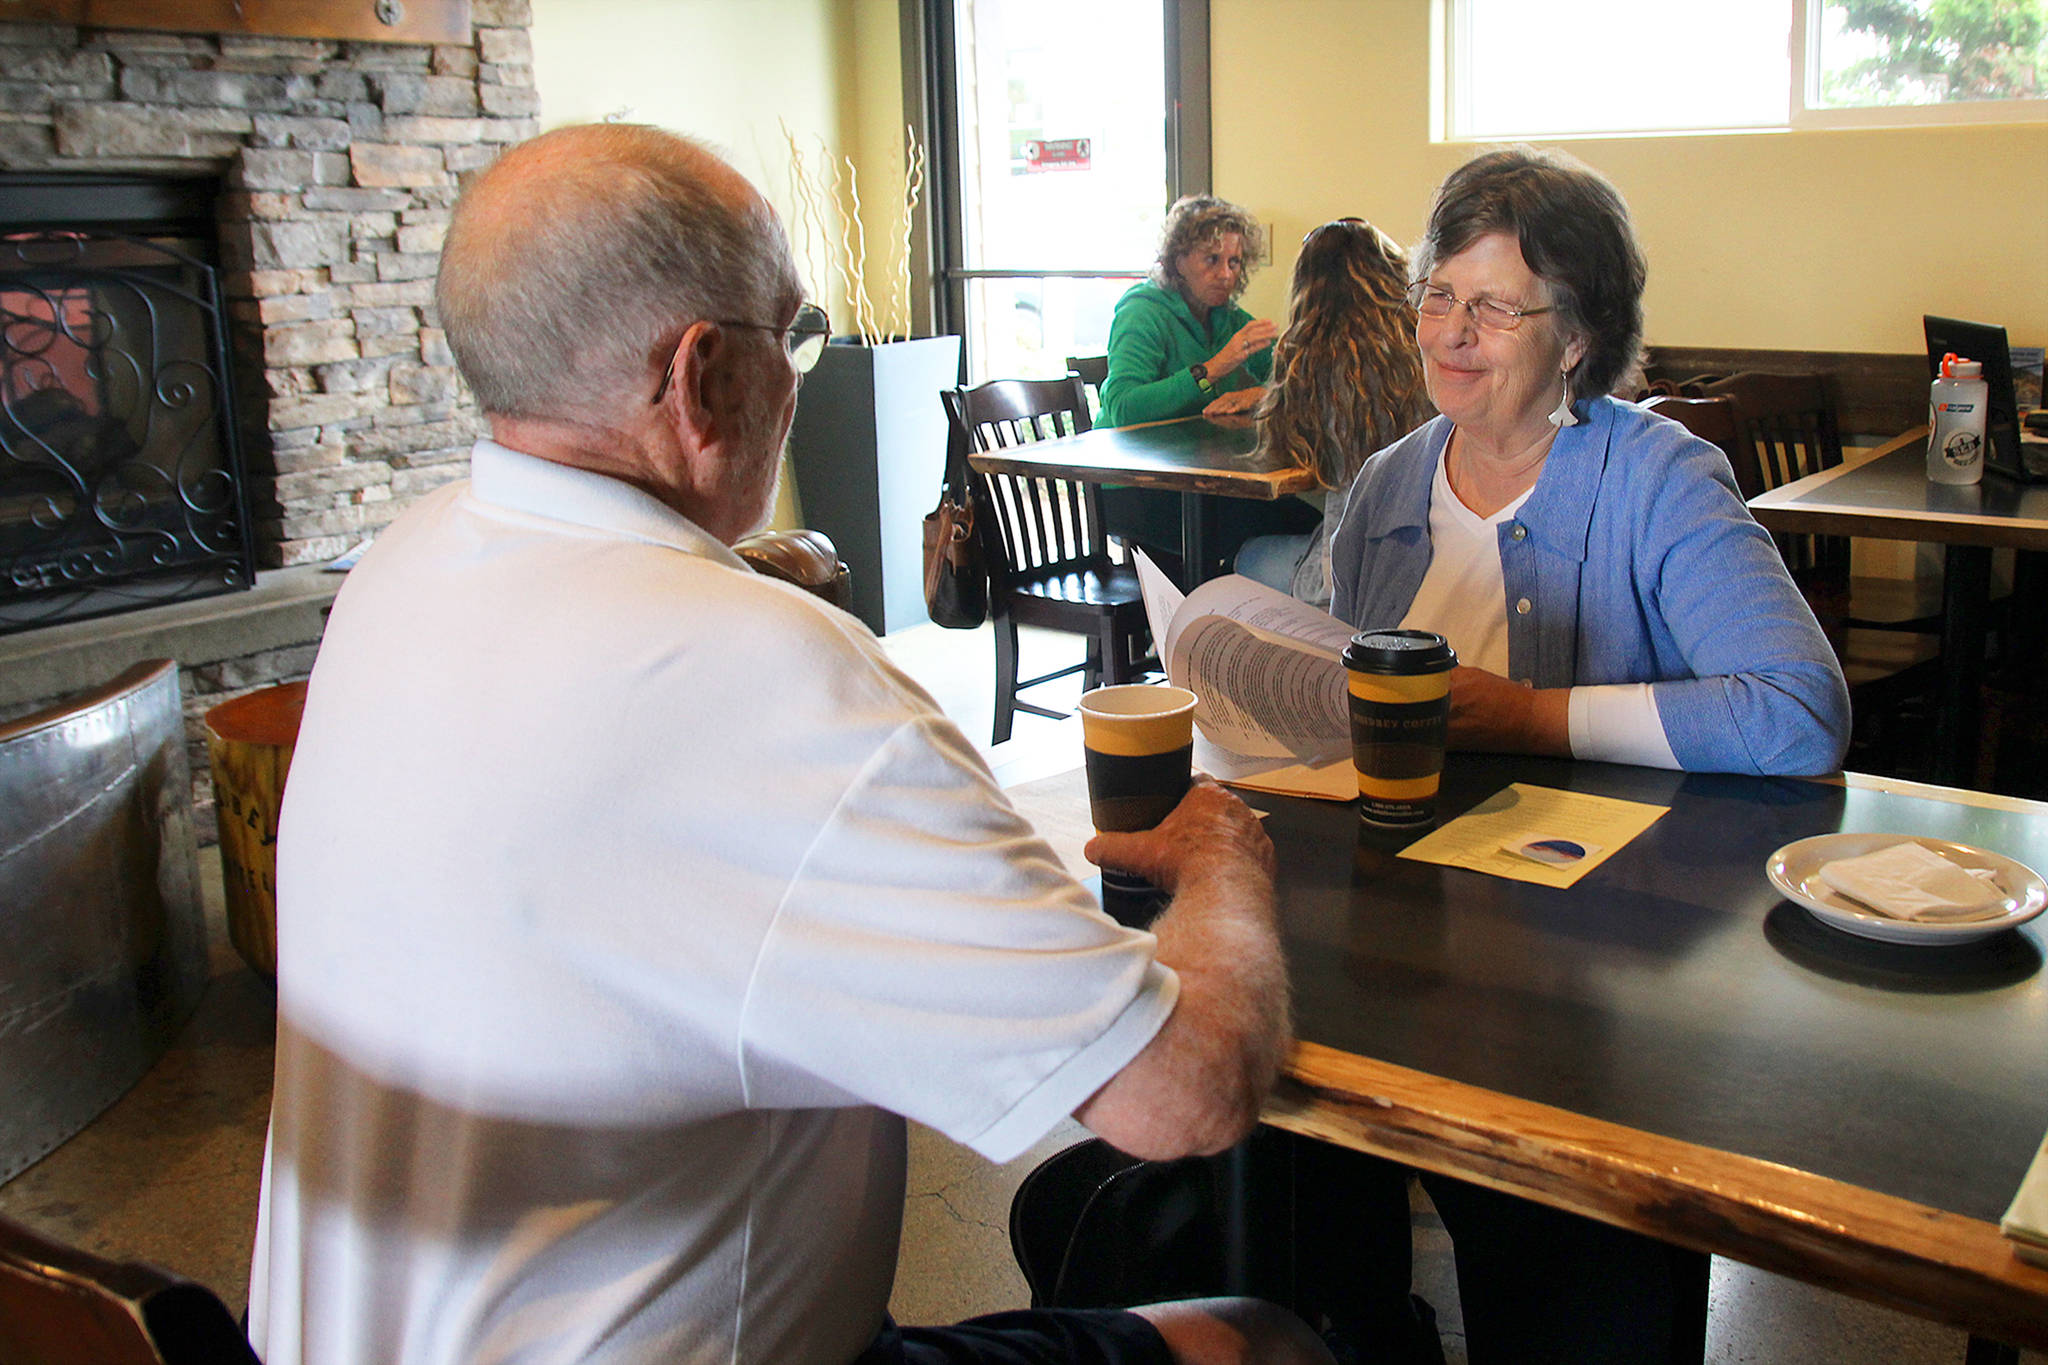 South Whidbey resident Cathy Whitmire and Oak Harbor City Councilman Jim Campbell discuss the new Civility First group at coffee Thursday morning.